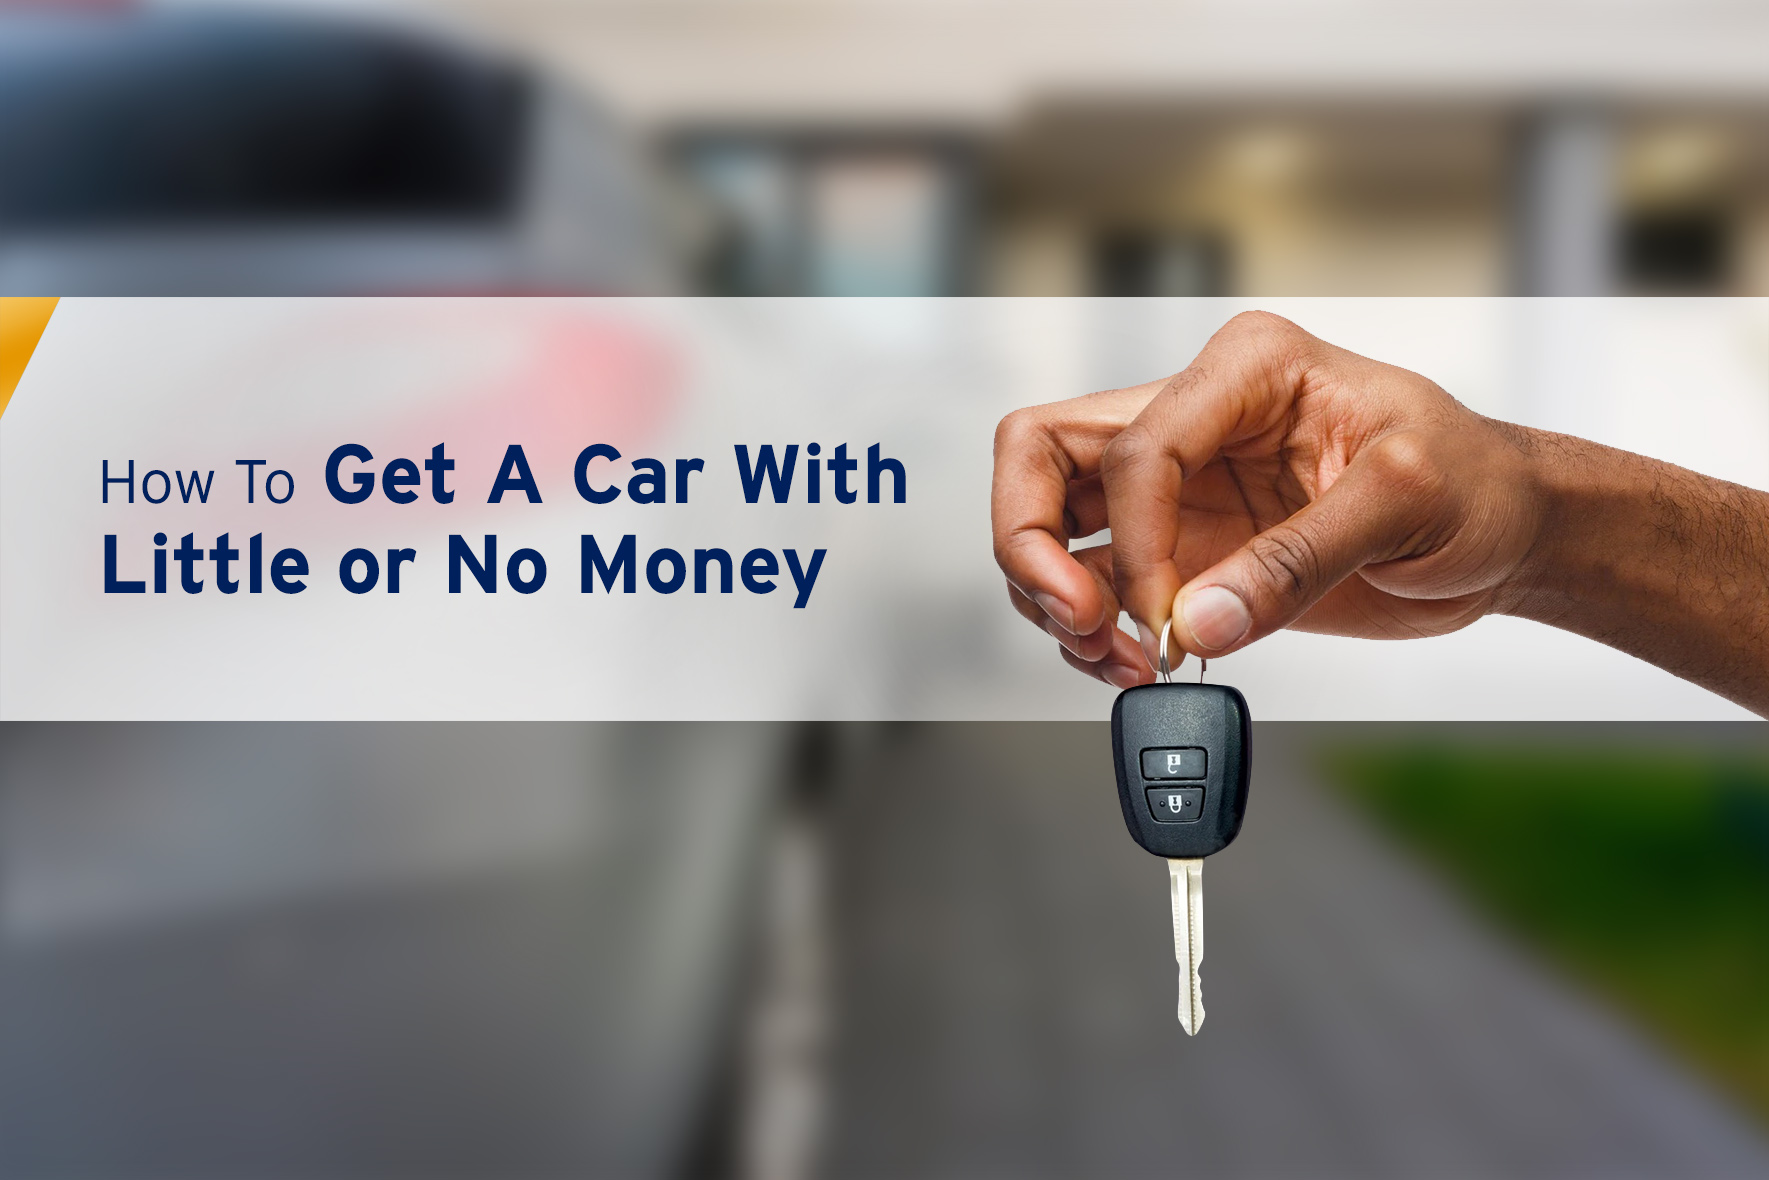 How-To-Get-A-Car-With-Little-or-No-Money